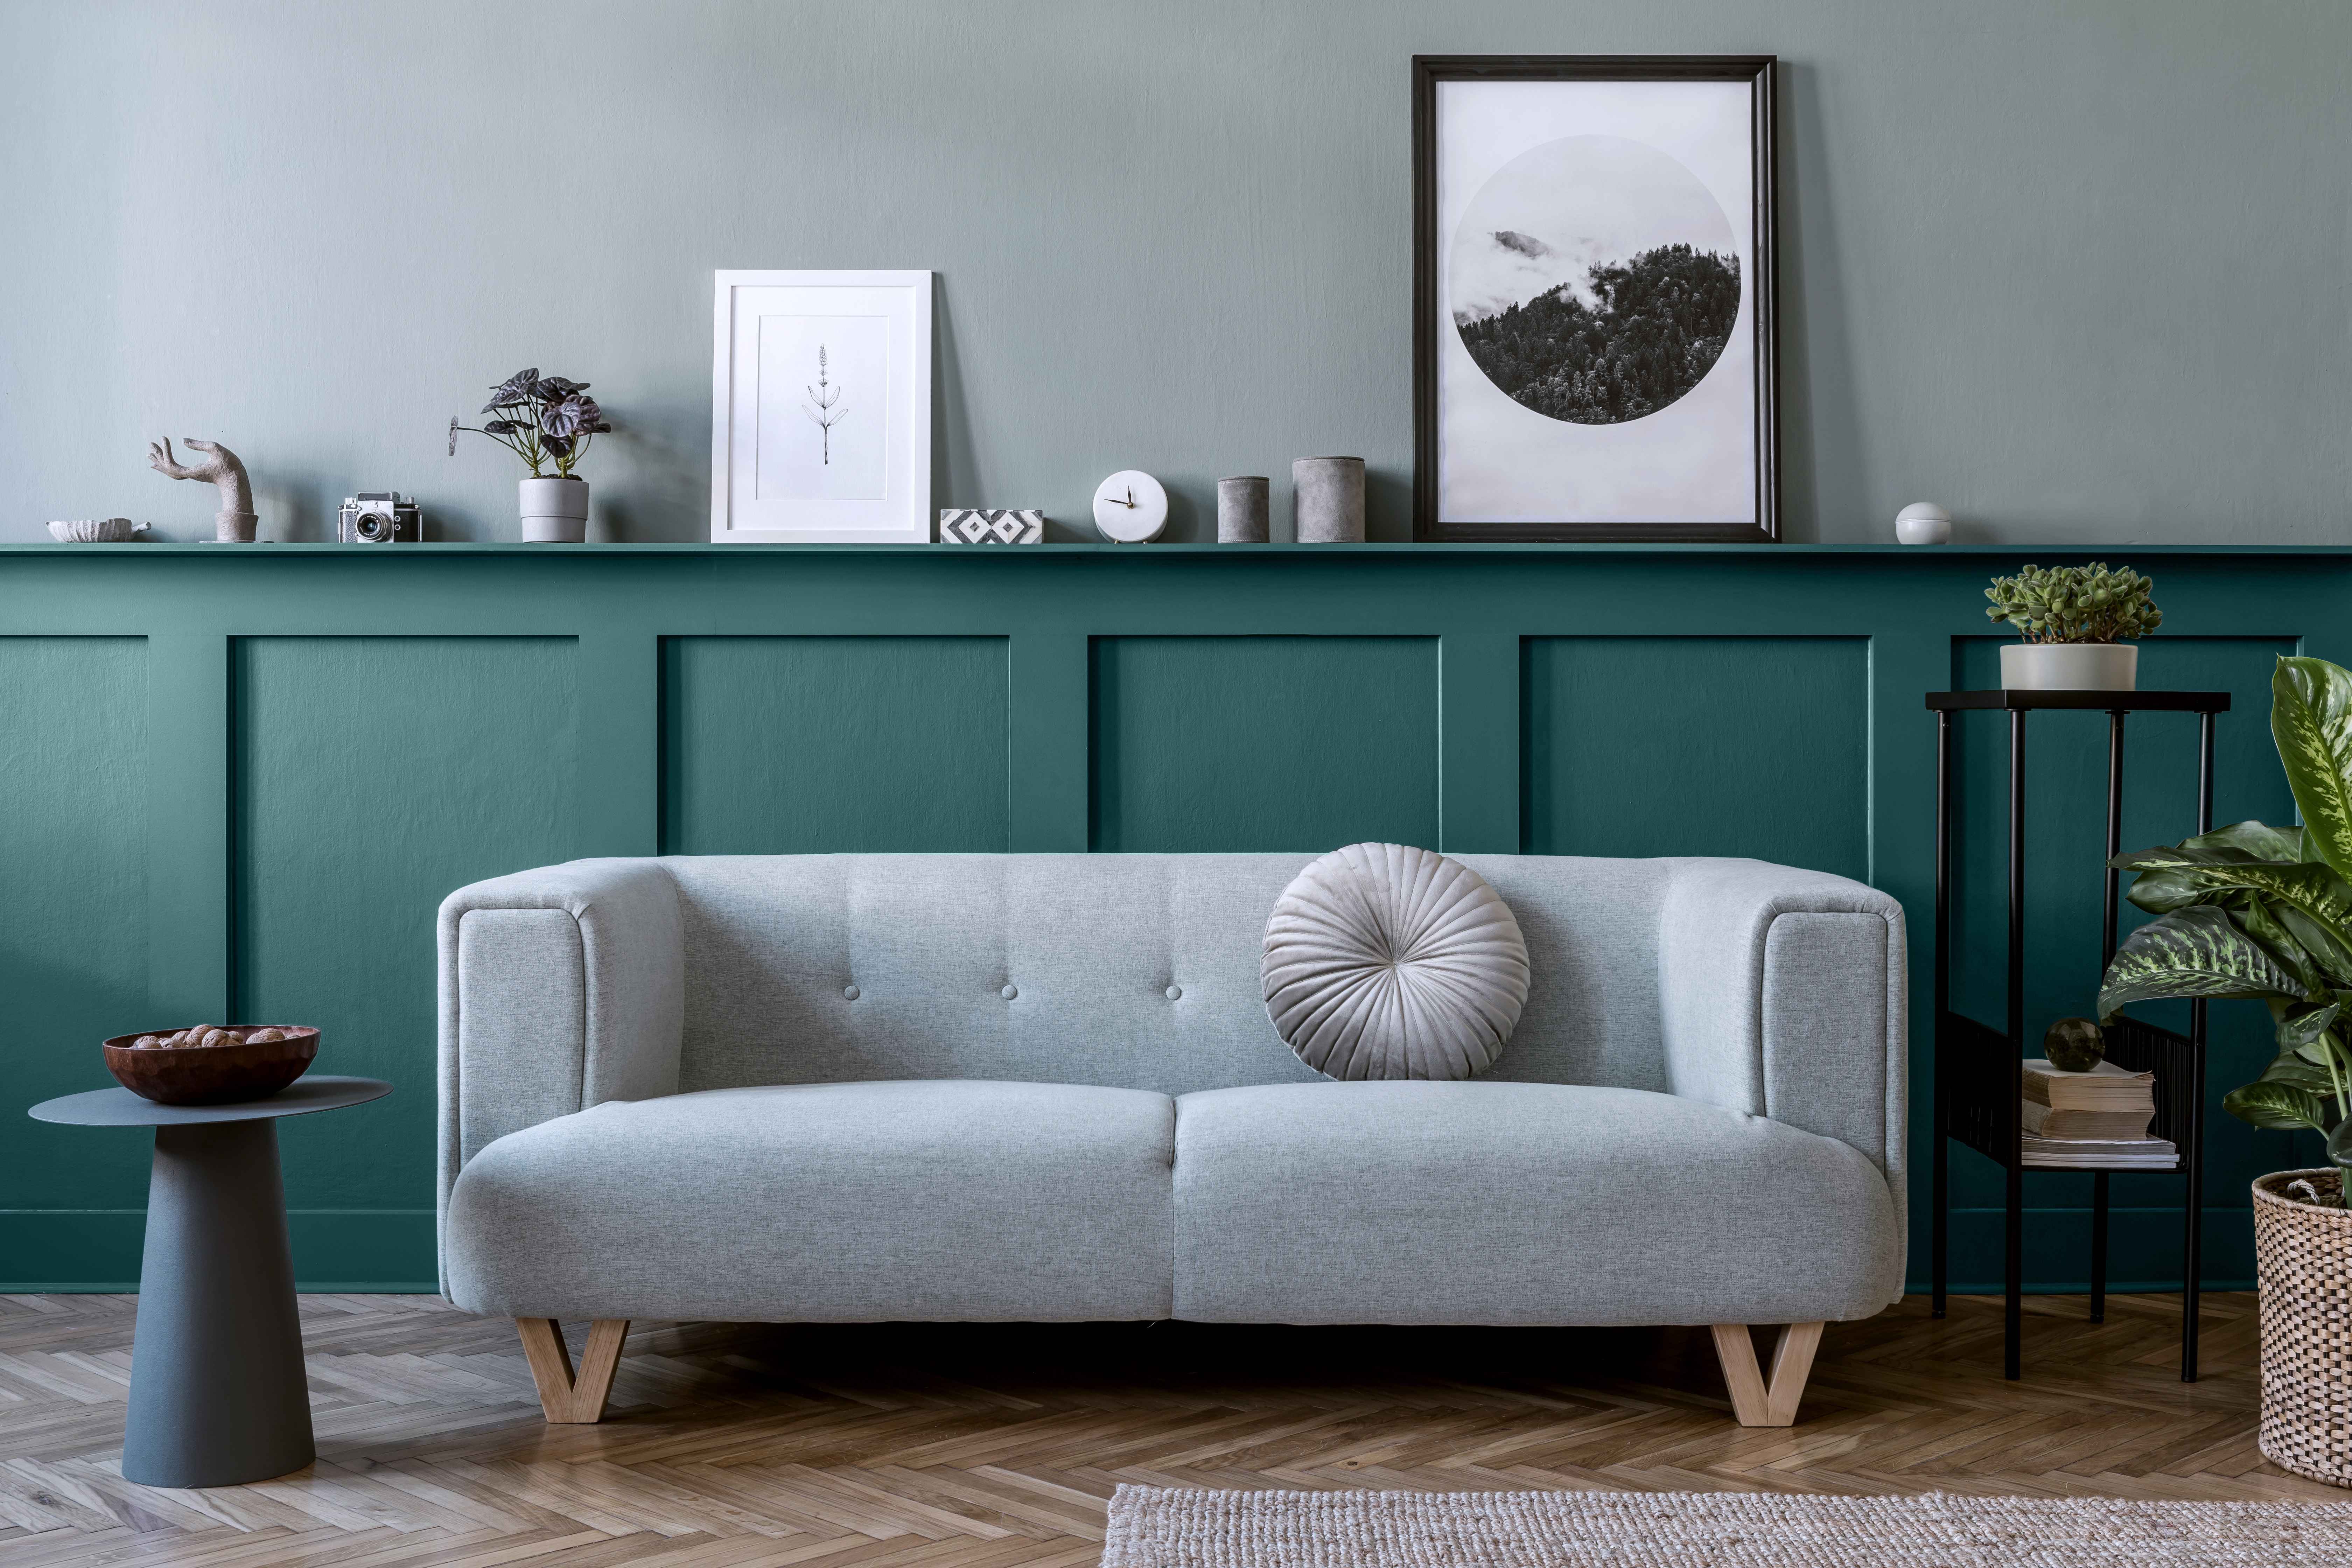 A living room featuring a lower accent wall.  The top of the wall is painted in an almost neutral blue-green color called Water.  The accent lower wall is called Ocean Abyss.  The room is decorated with neutral casual decorative elements raging from a light gray upholstered sofa, a black tall side table, and concrete gray color small decorative elements. 